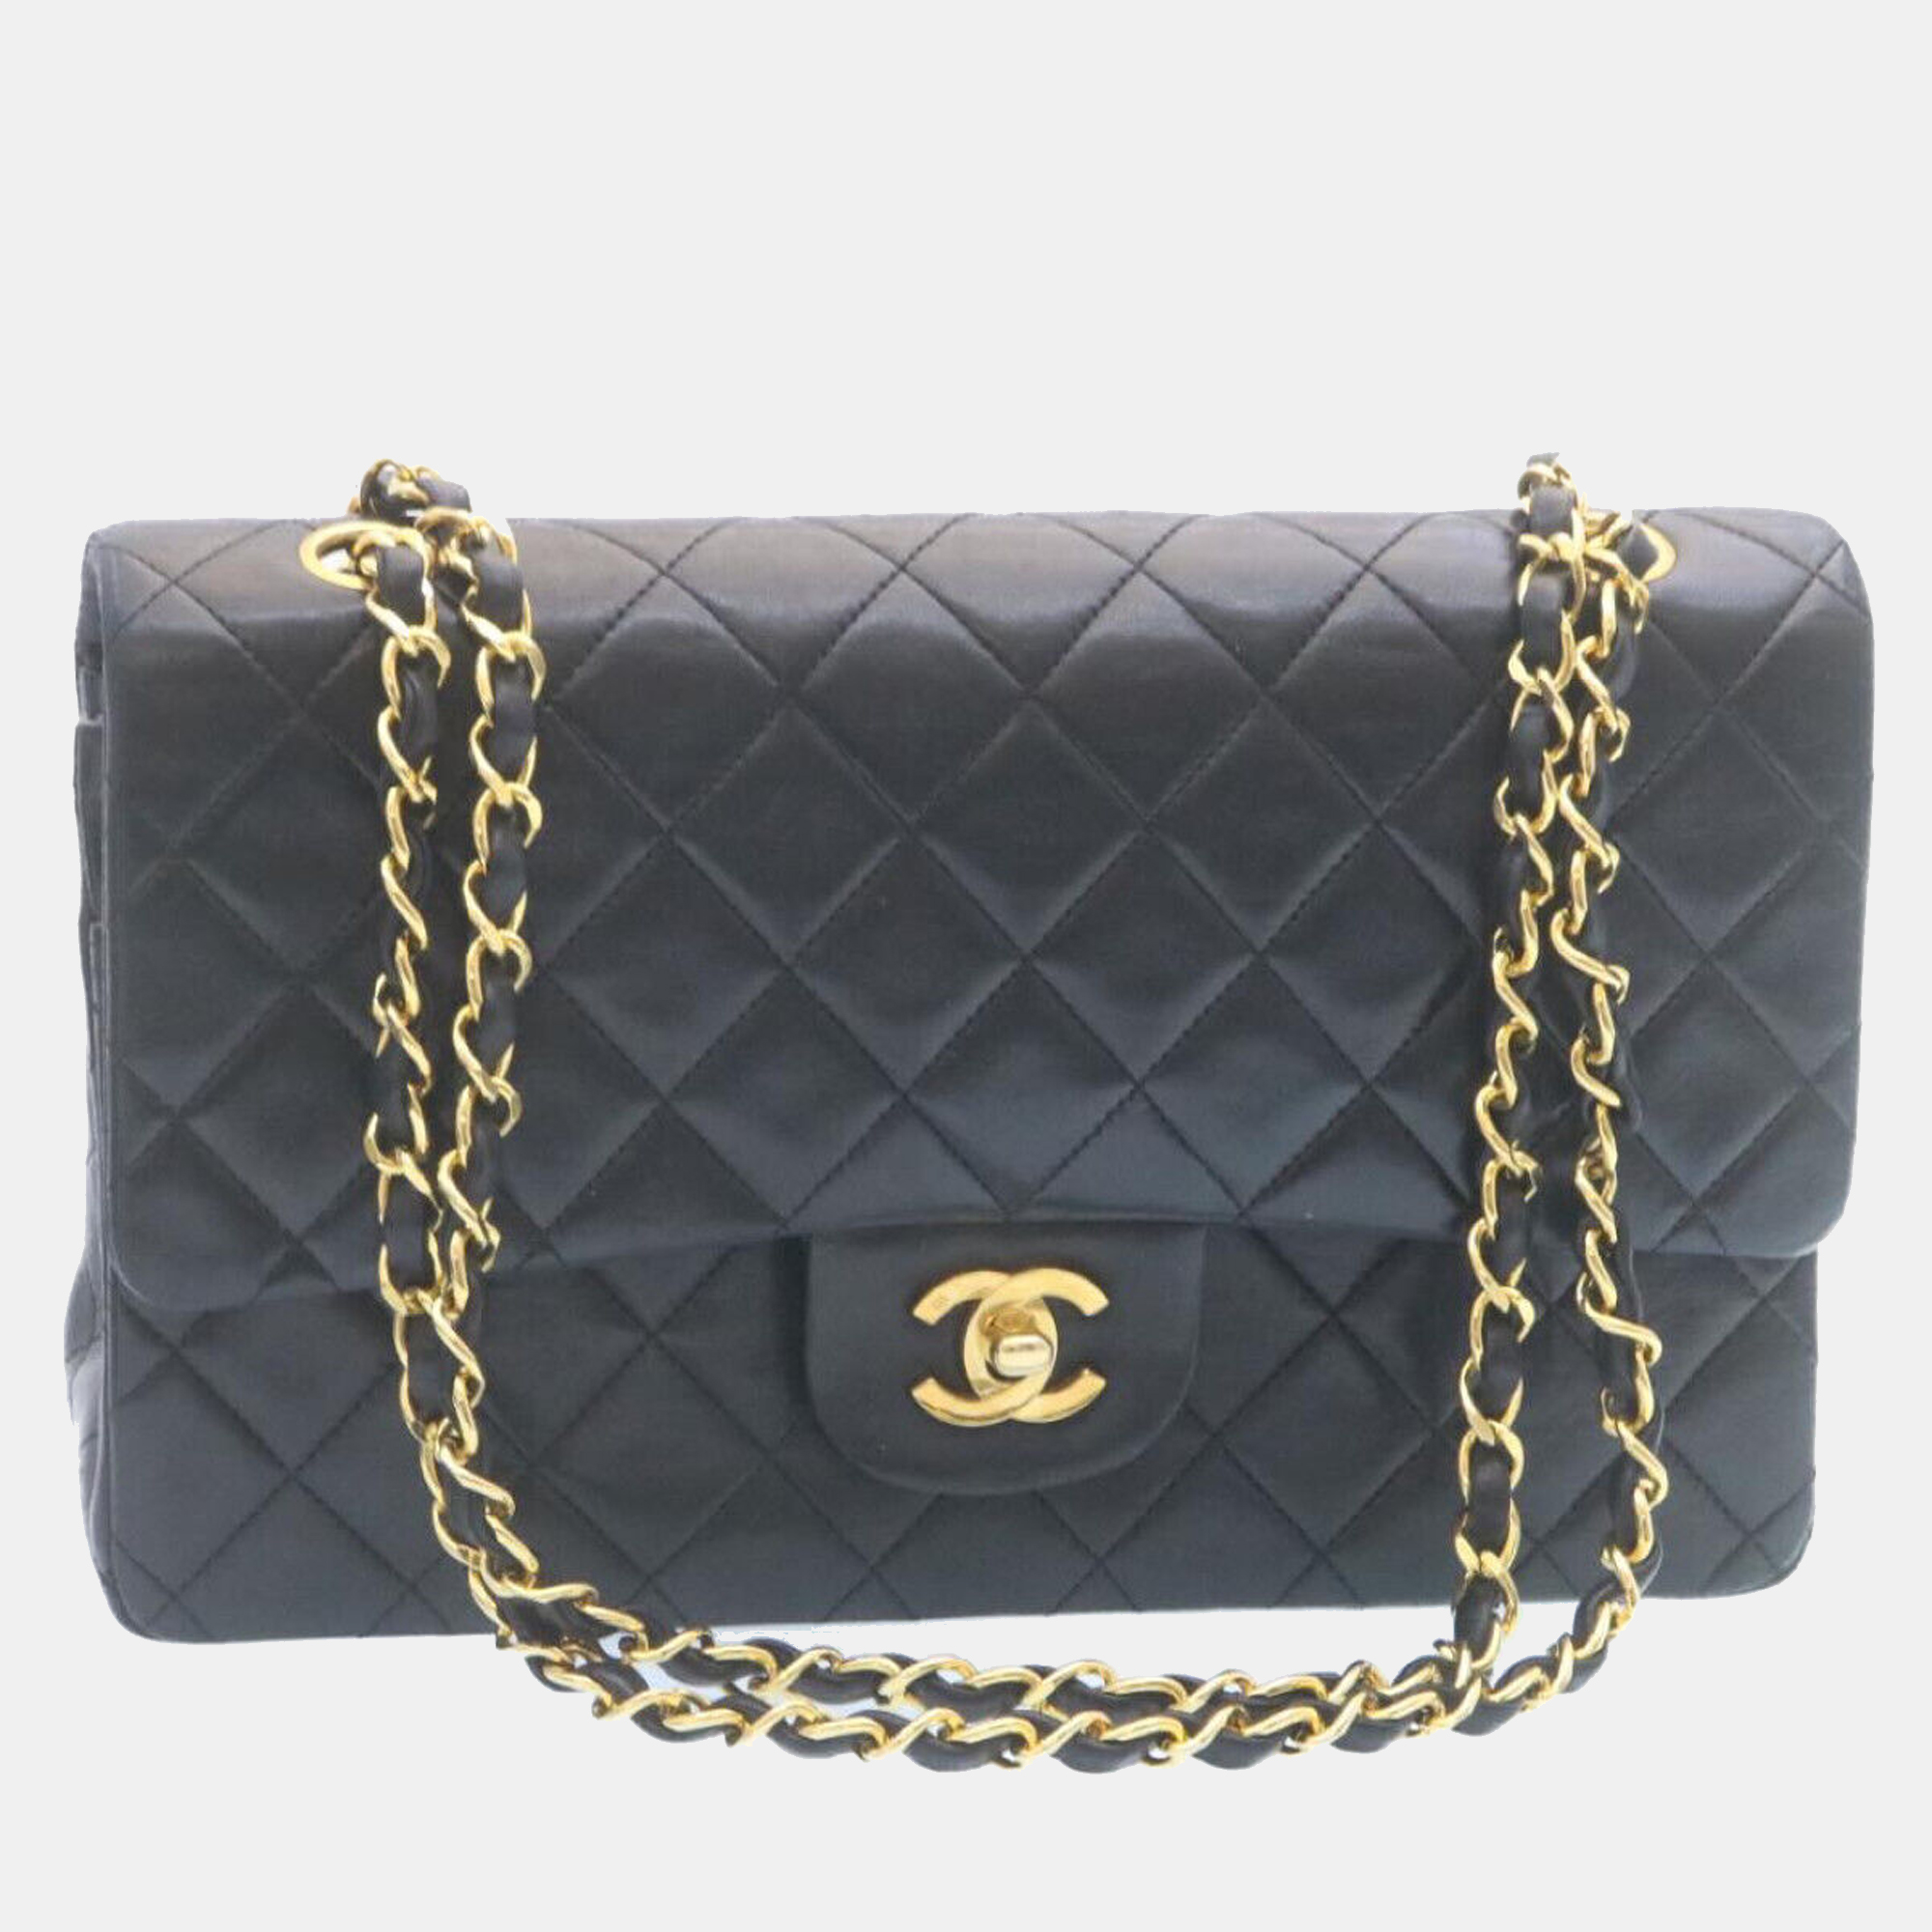 Chanel black leather classic double flap bag